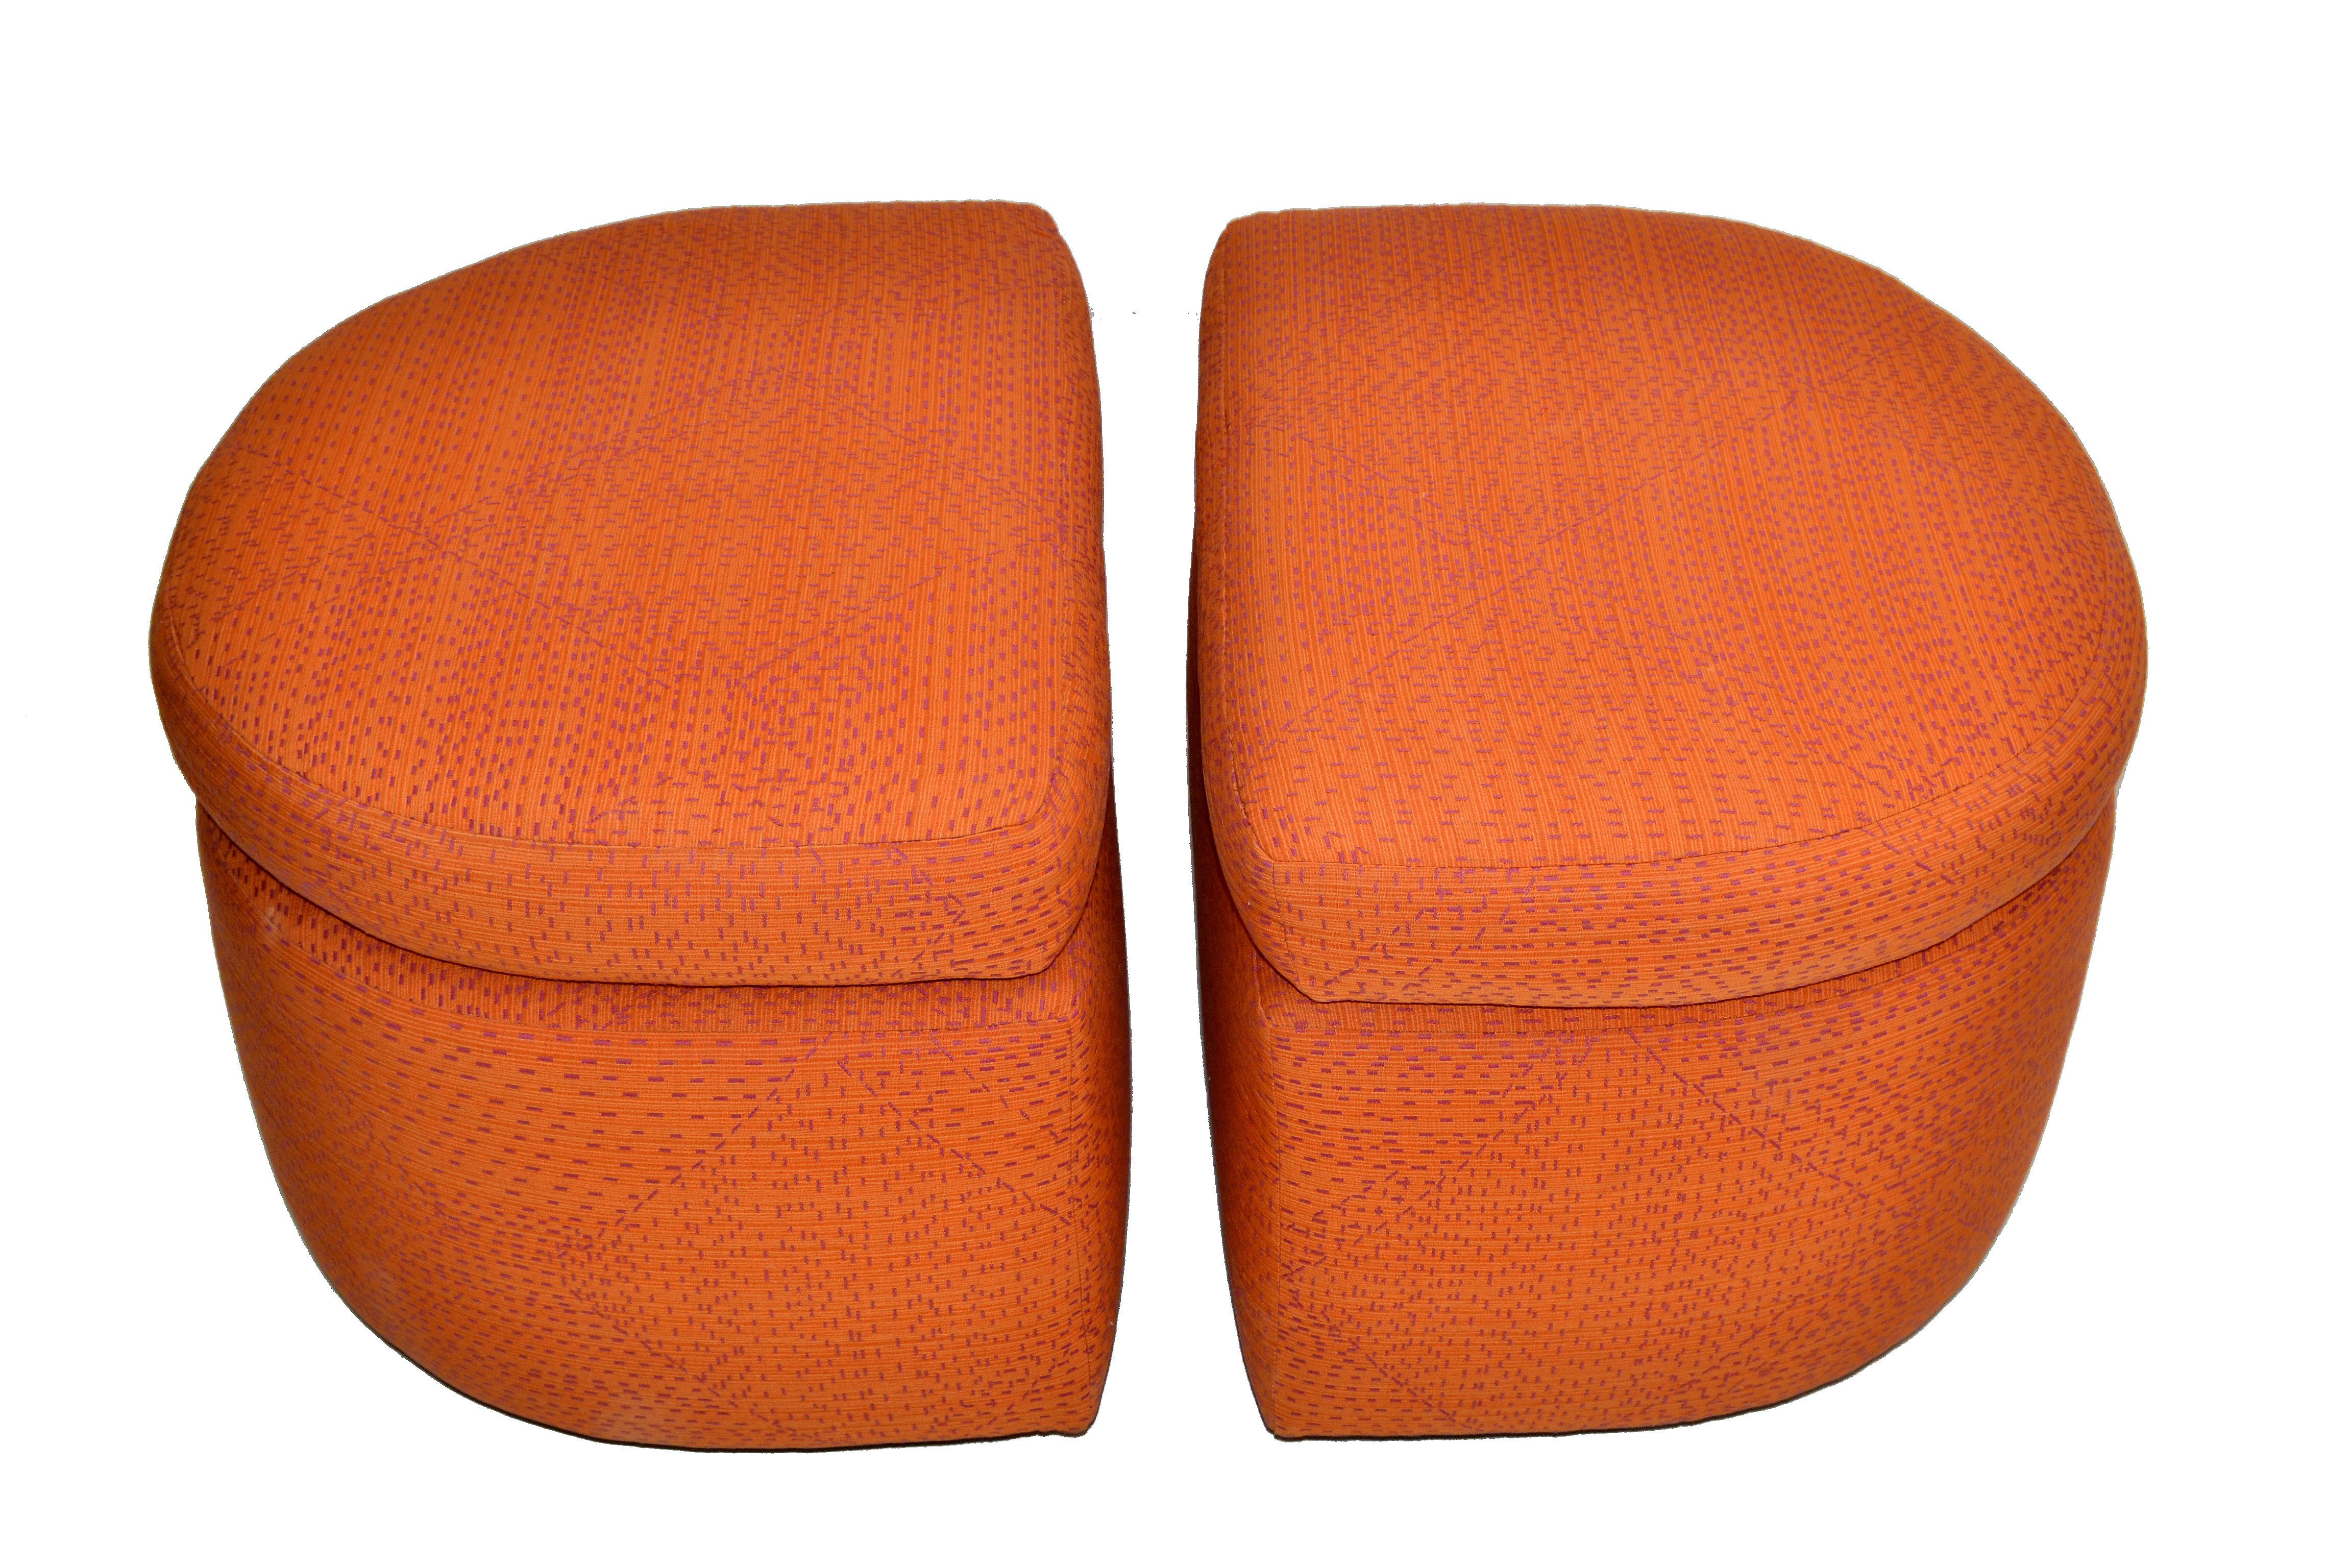 20th Century Mid-Century Modern Orange Cotton Upholstery Ottoman on Casters & Cushions - Pair For Sale